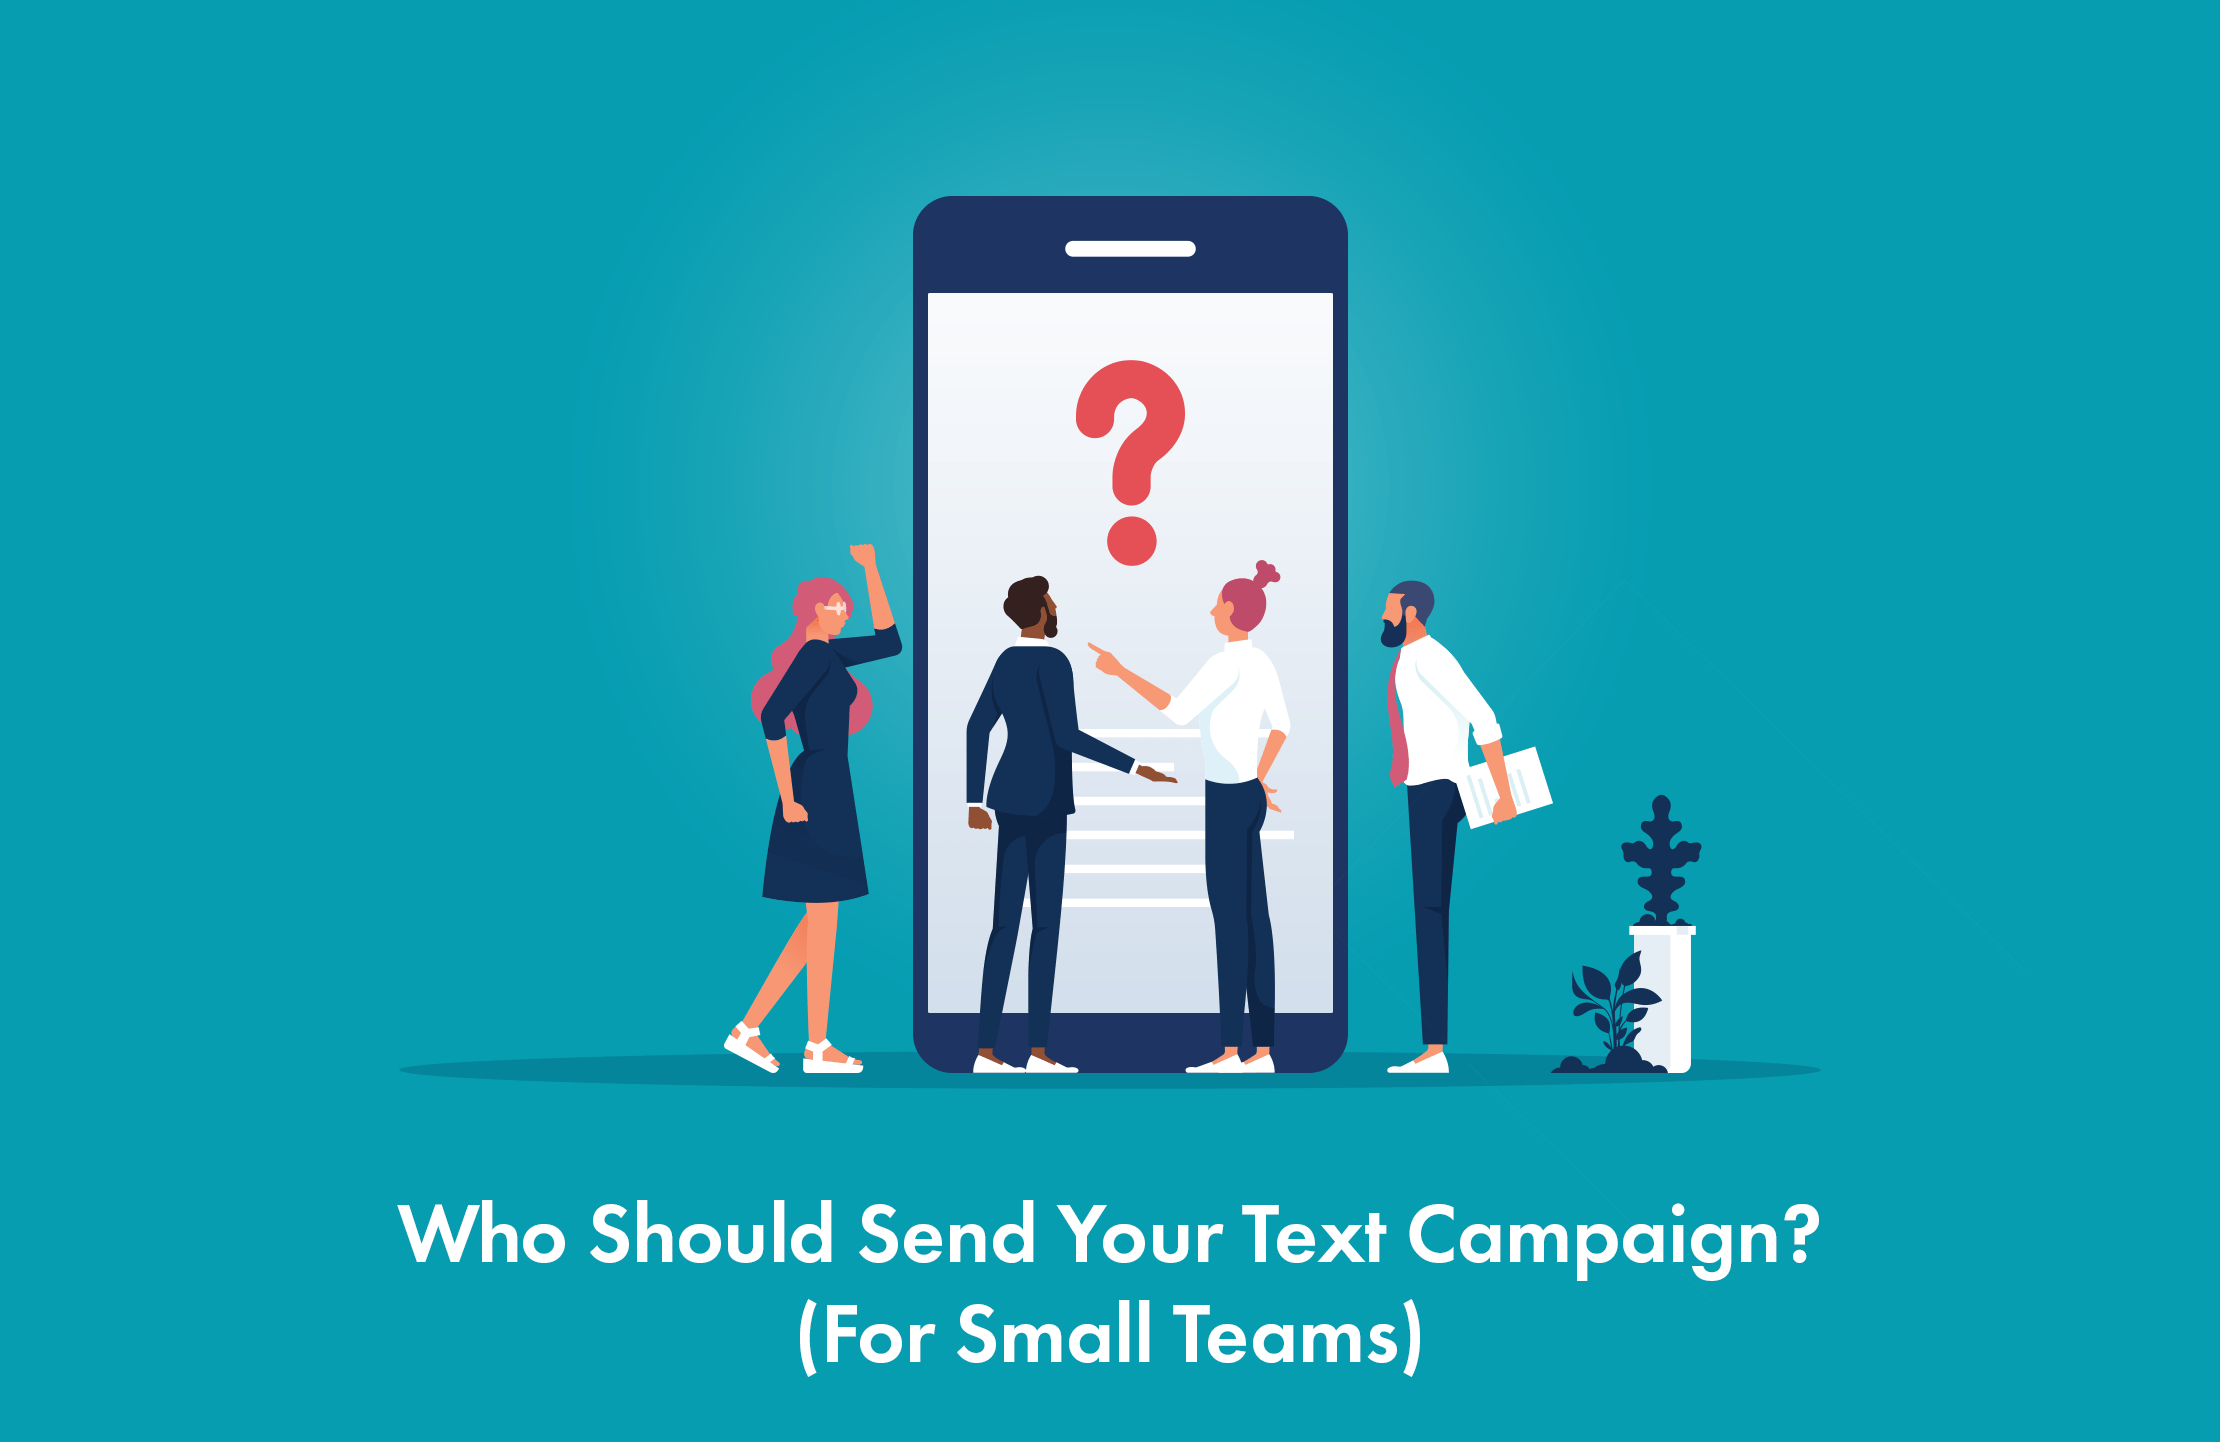 Who Should Send Your Text Campaign? (For Small Teams)